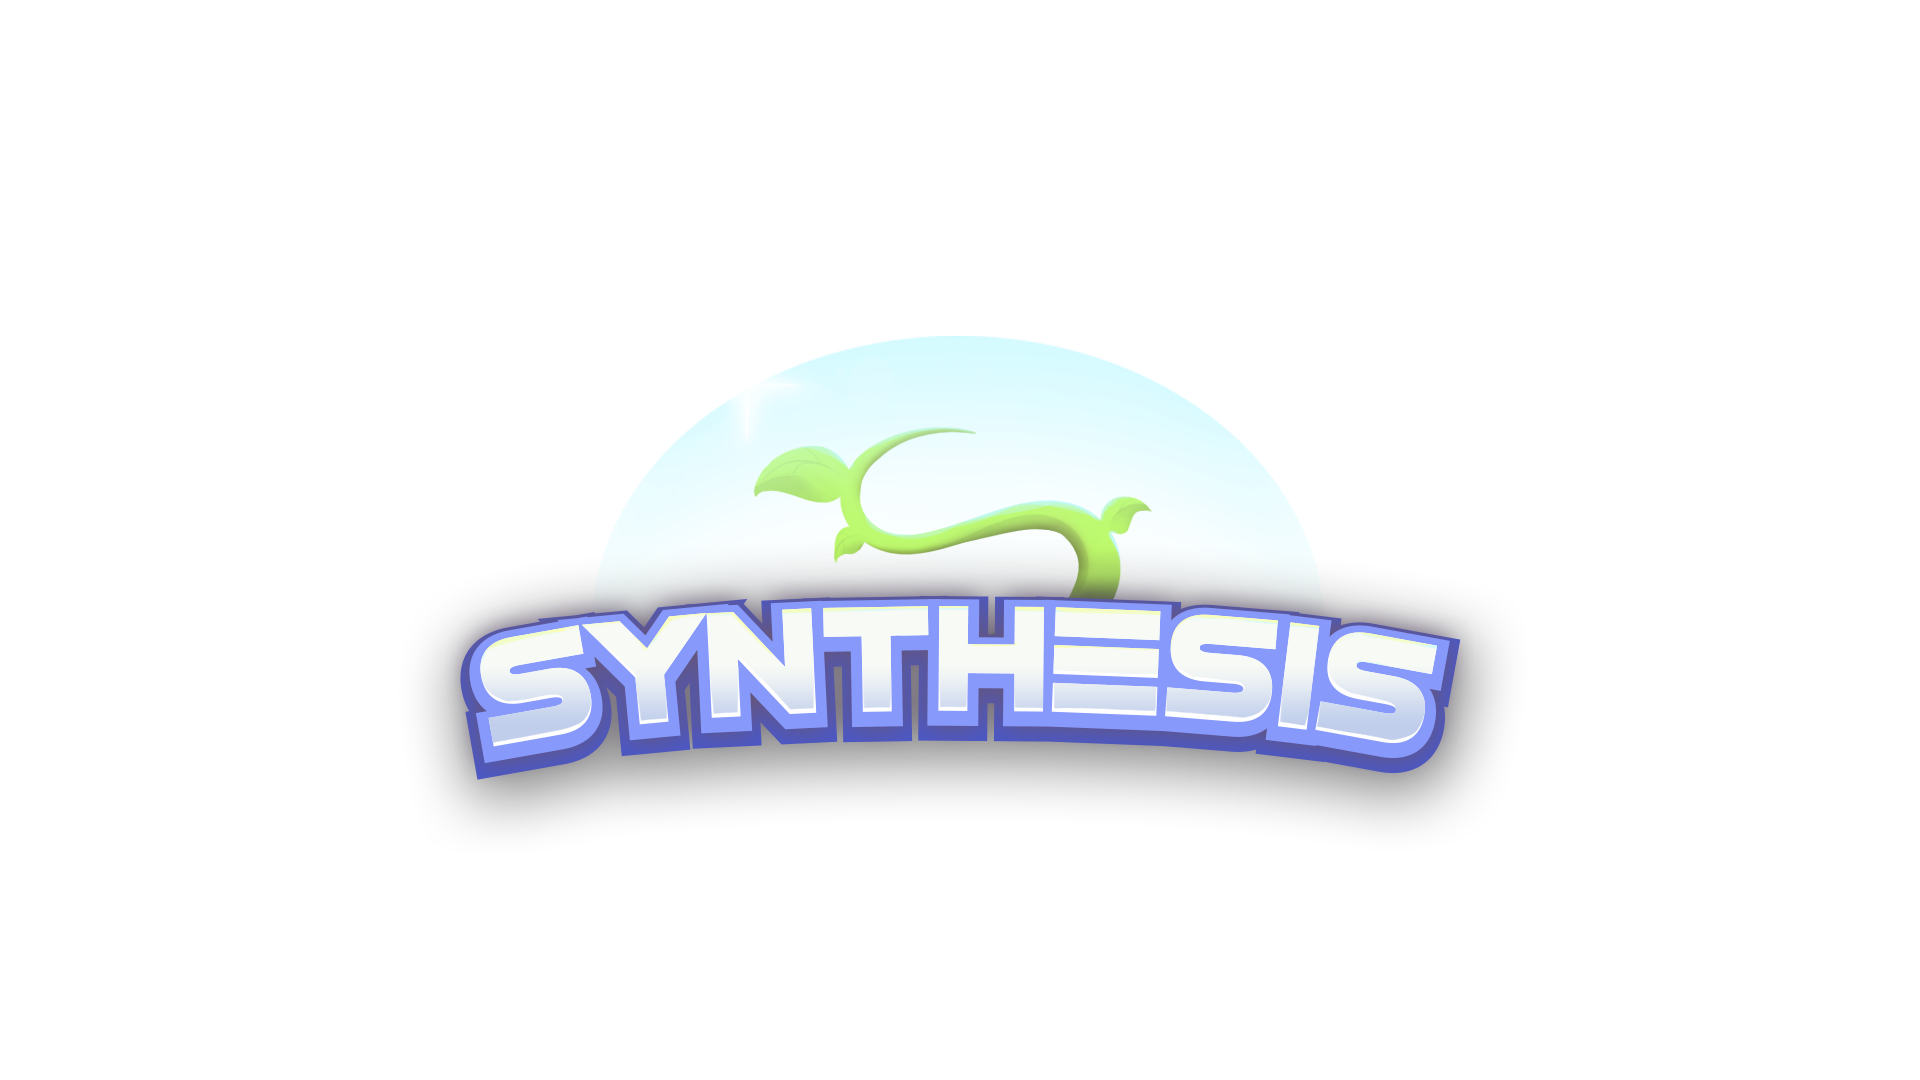 Project Synthesis